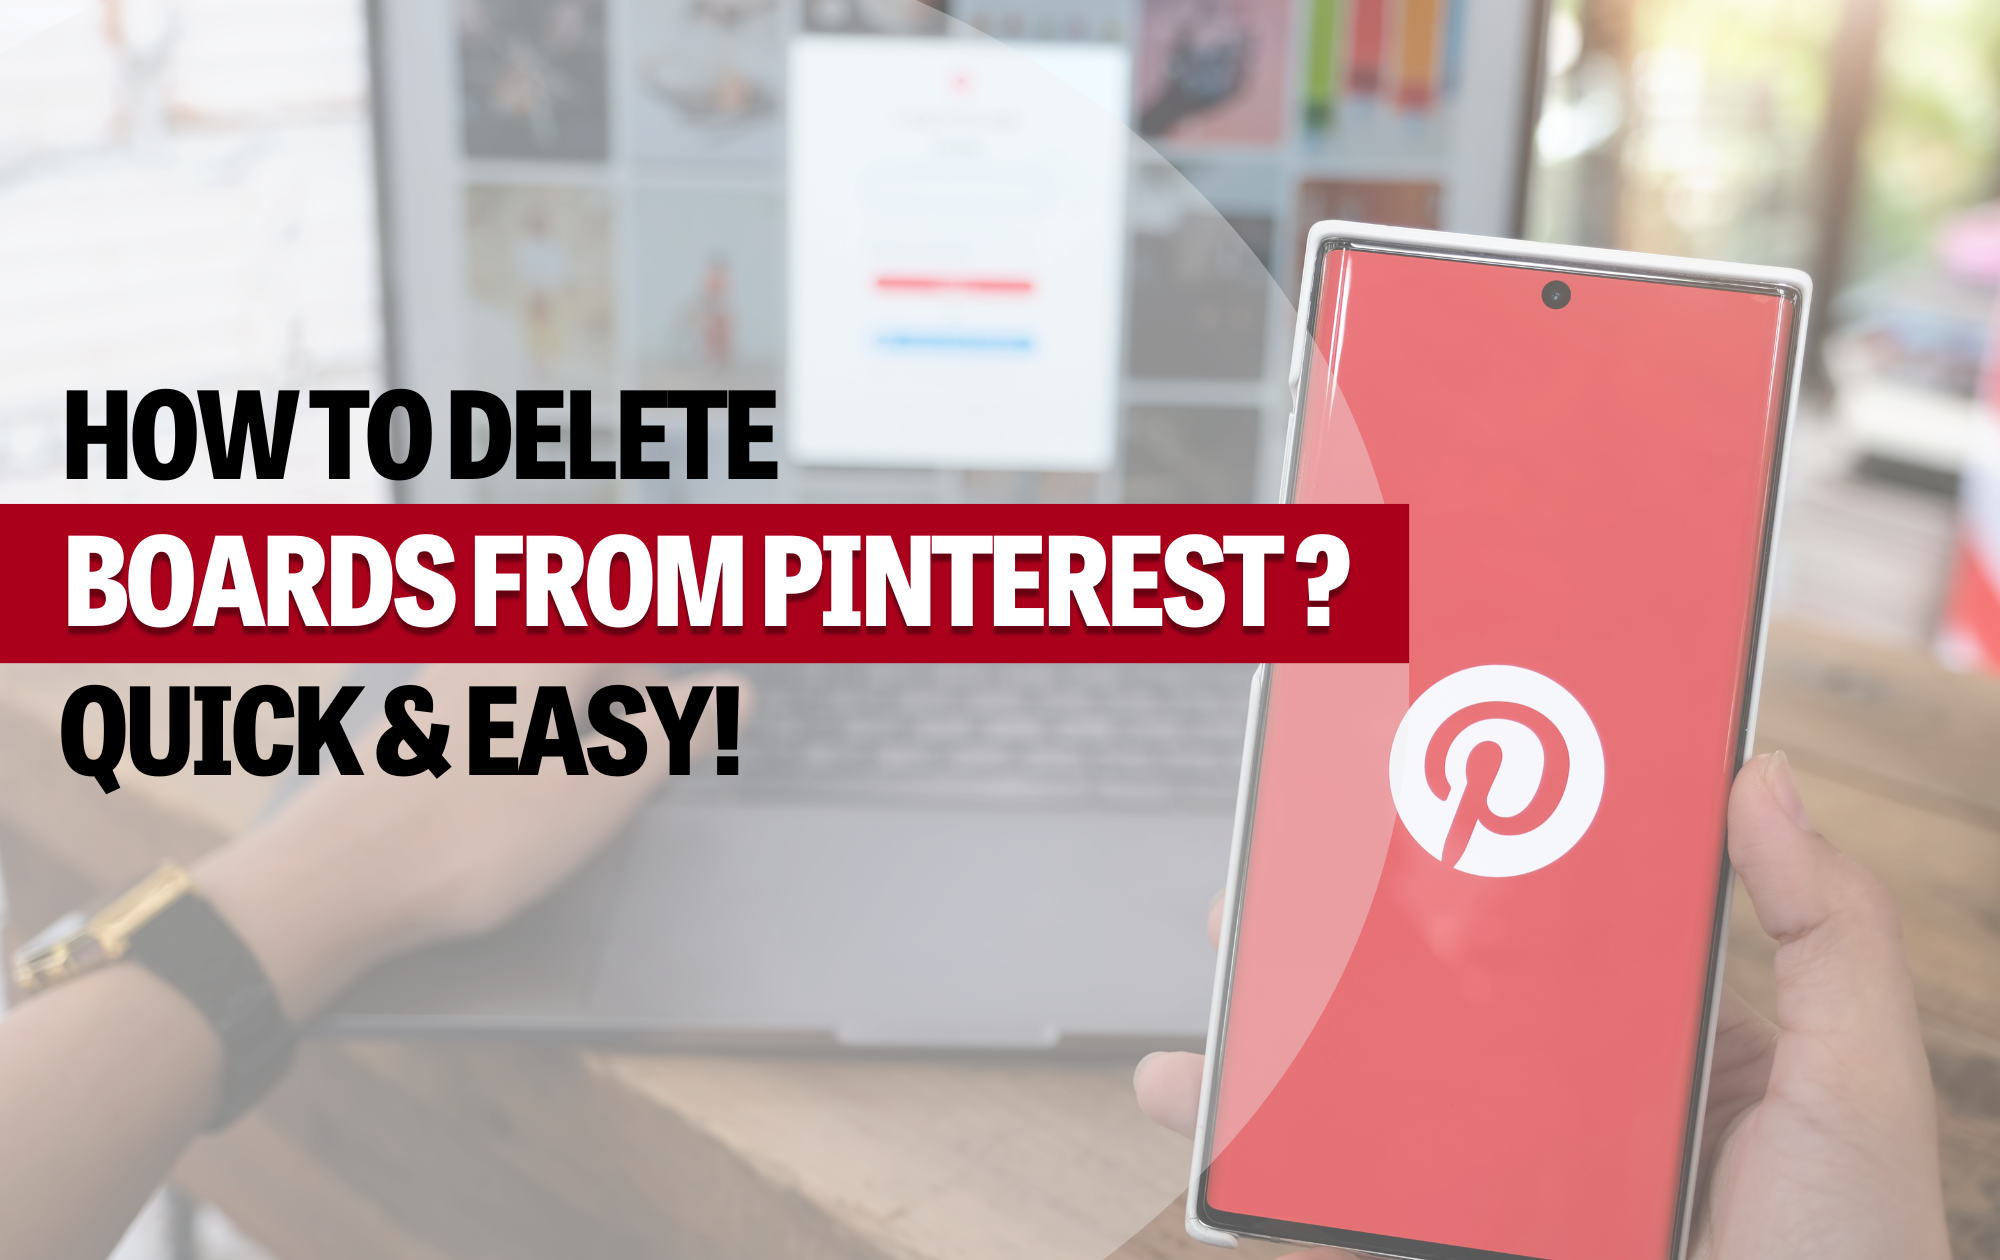 How to Delete Boards from Pinterest